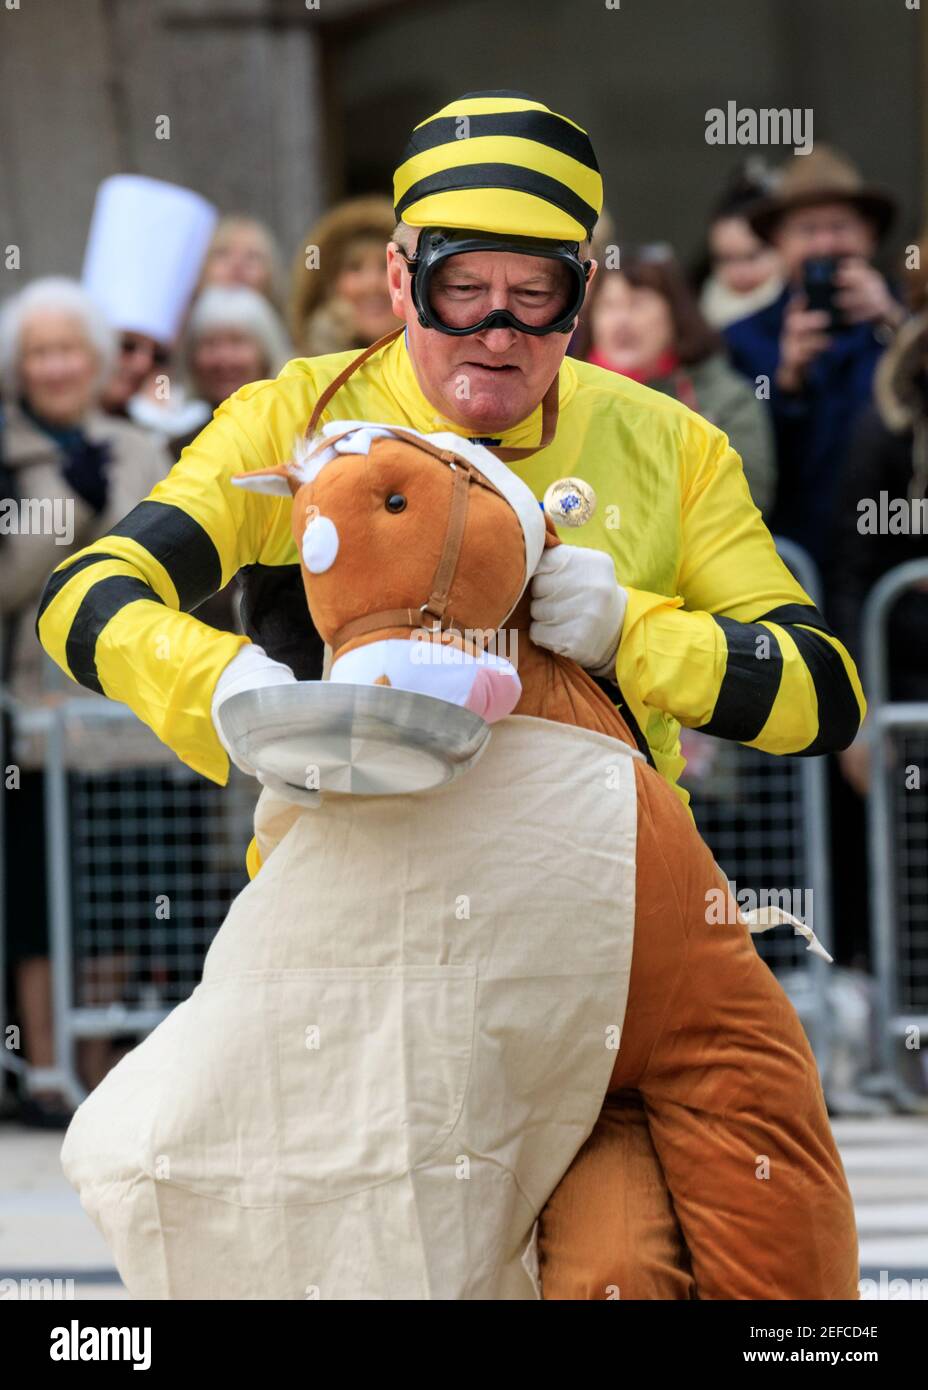 Participant from the Worshipful Company of Farmers at the  Shrove Tuesday Inter-Livery pancake races, London, UK Stock Photo